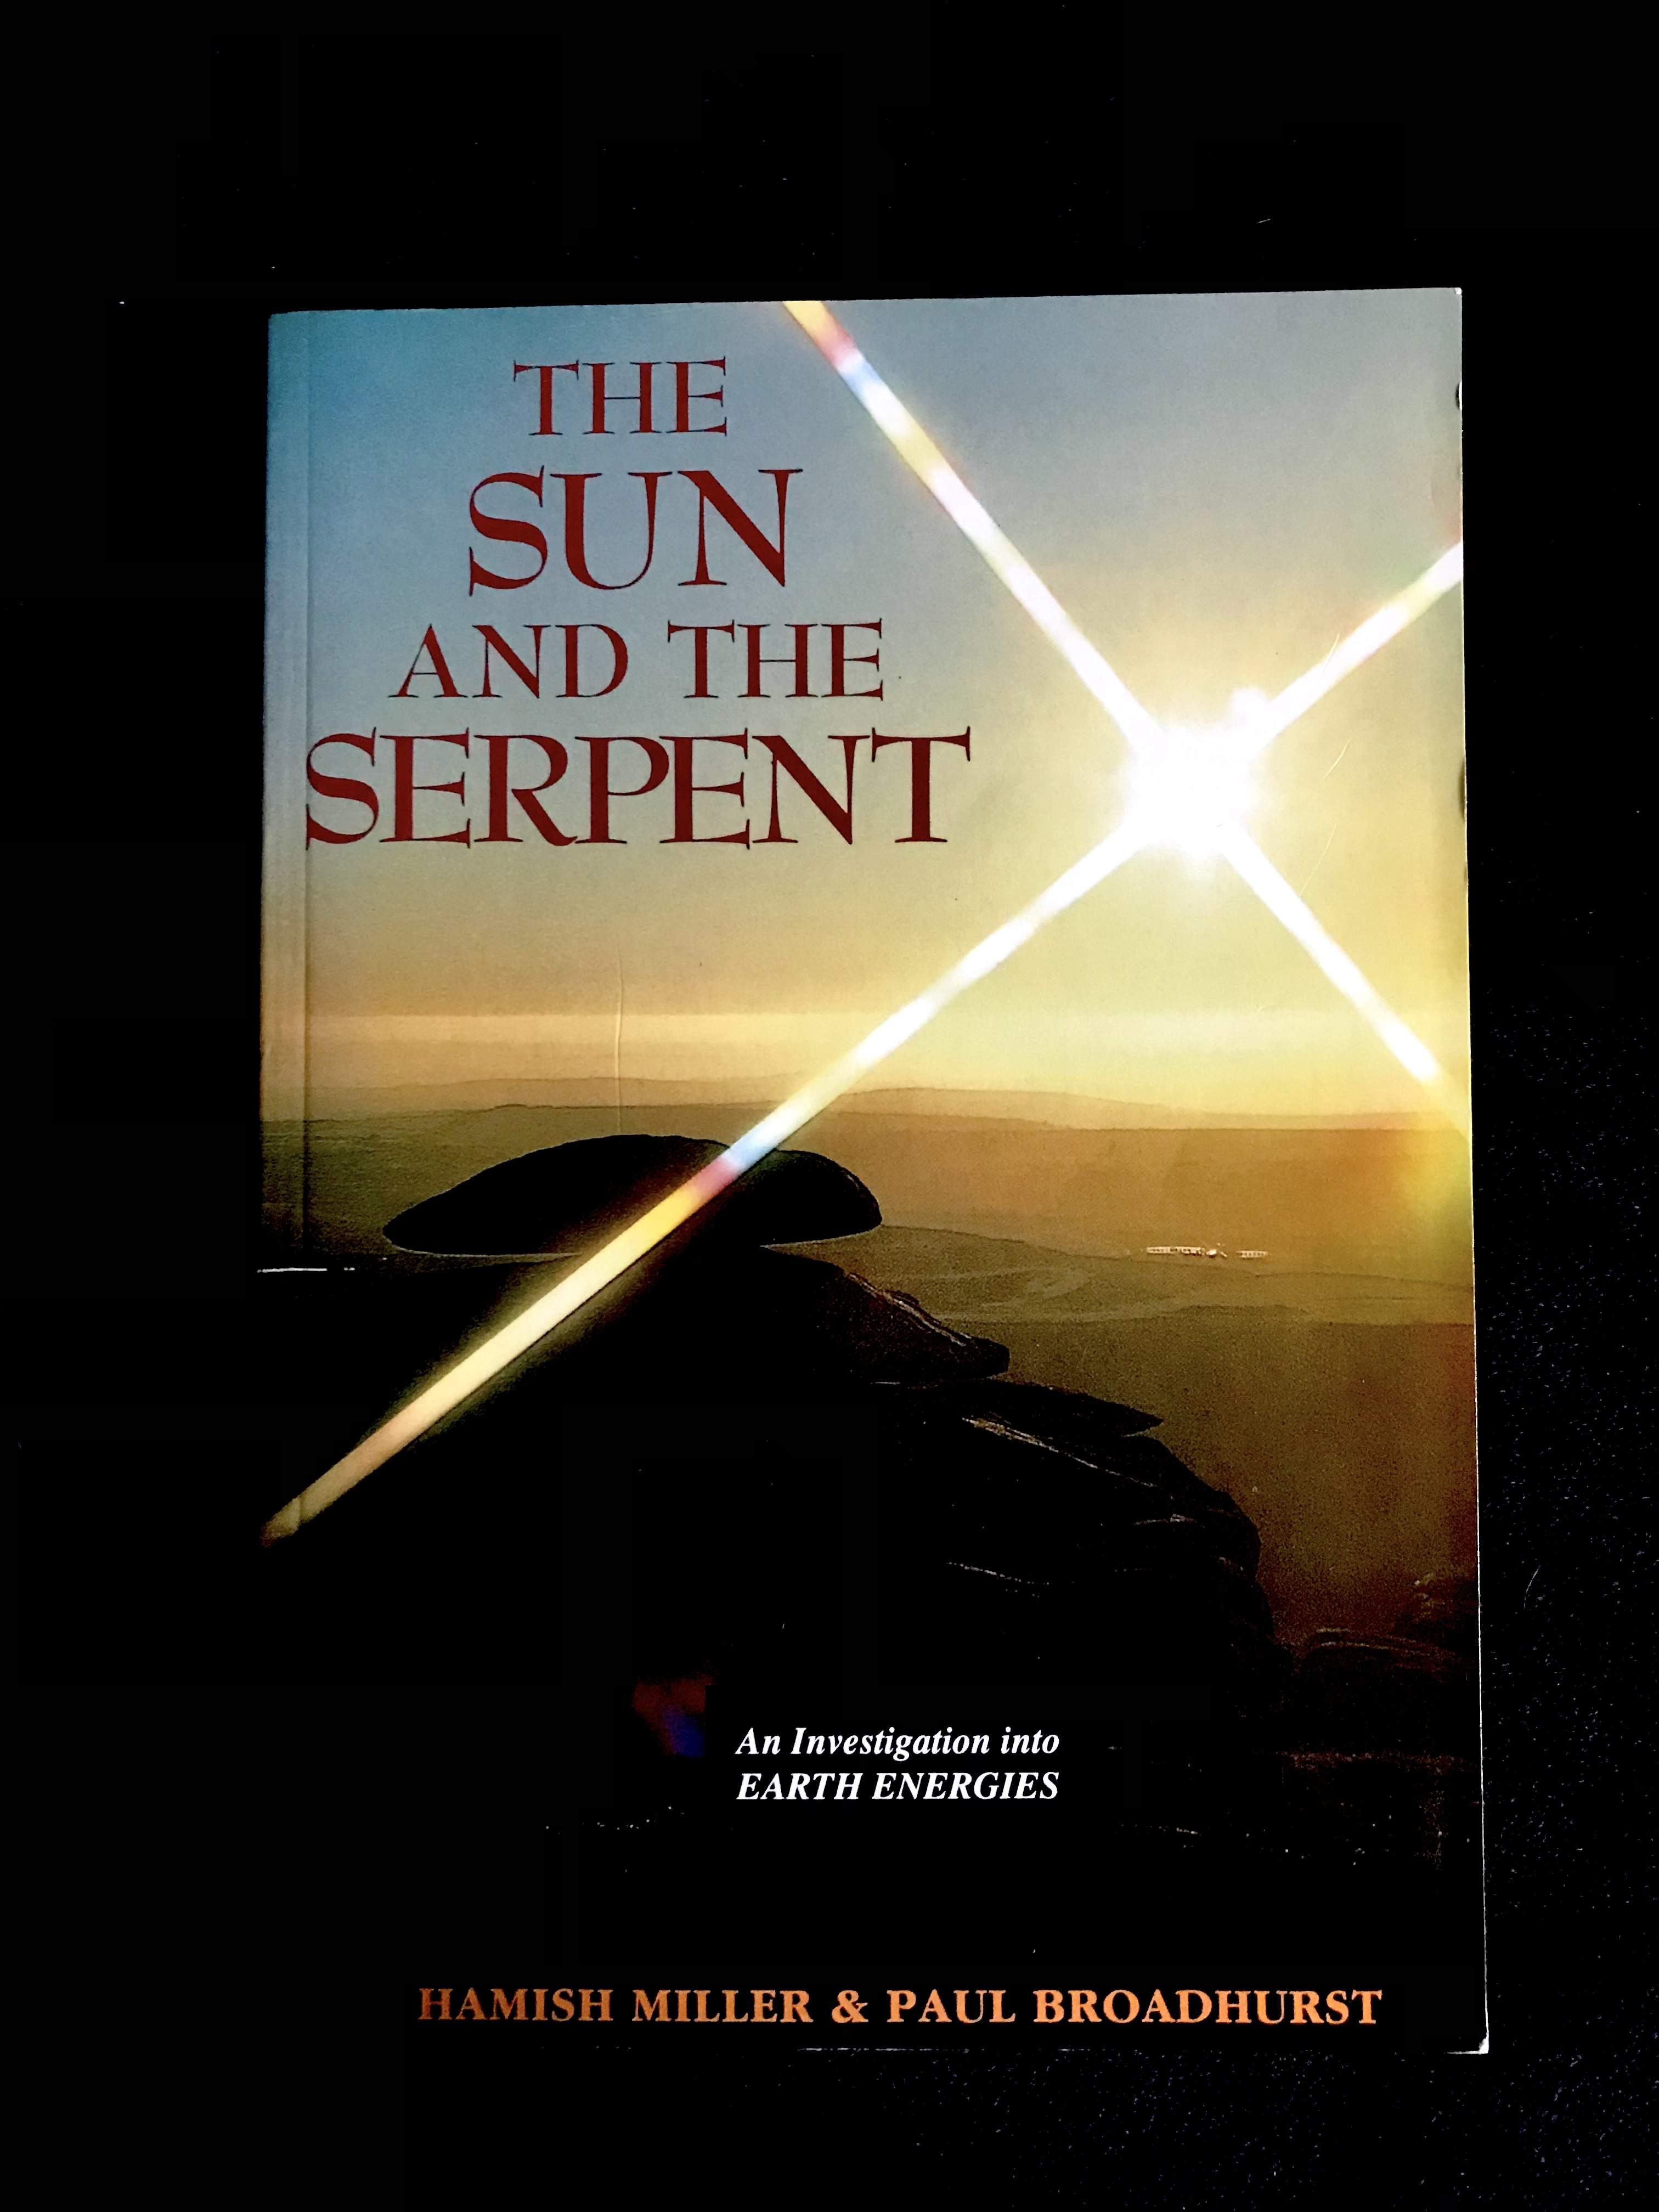 The Sun And The Serpent by Hamish Miller & Paul Broadhurst